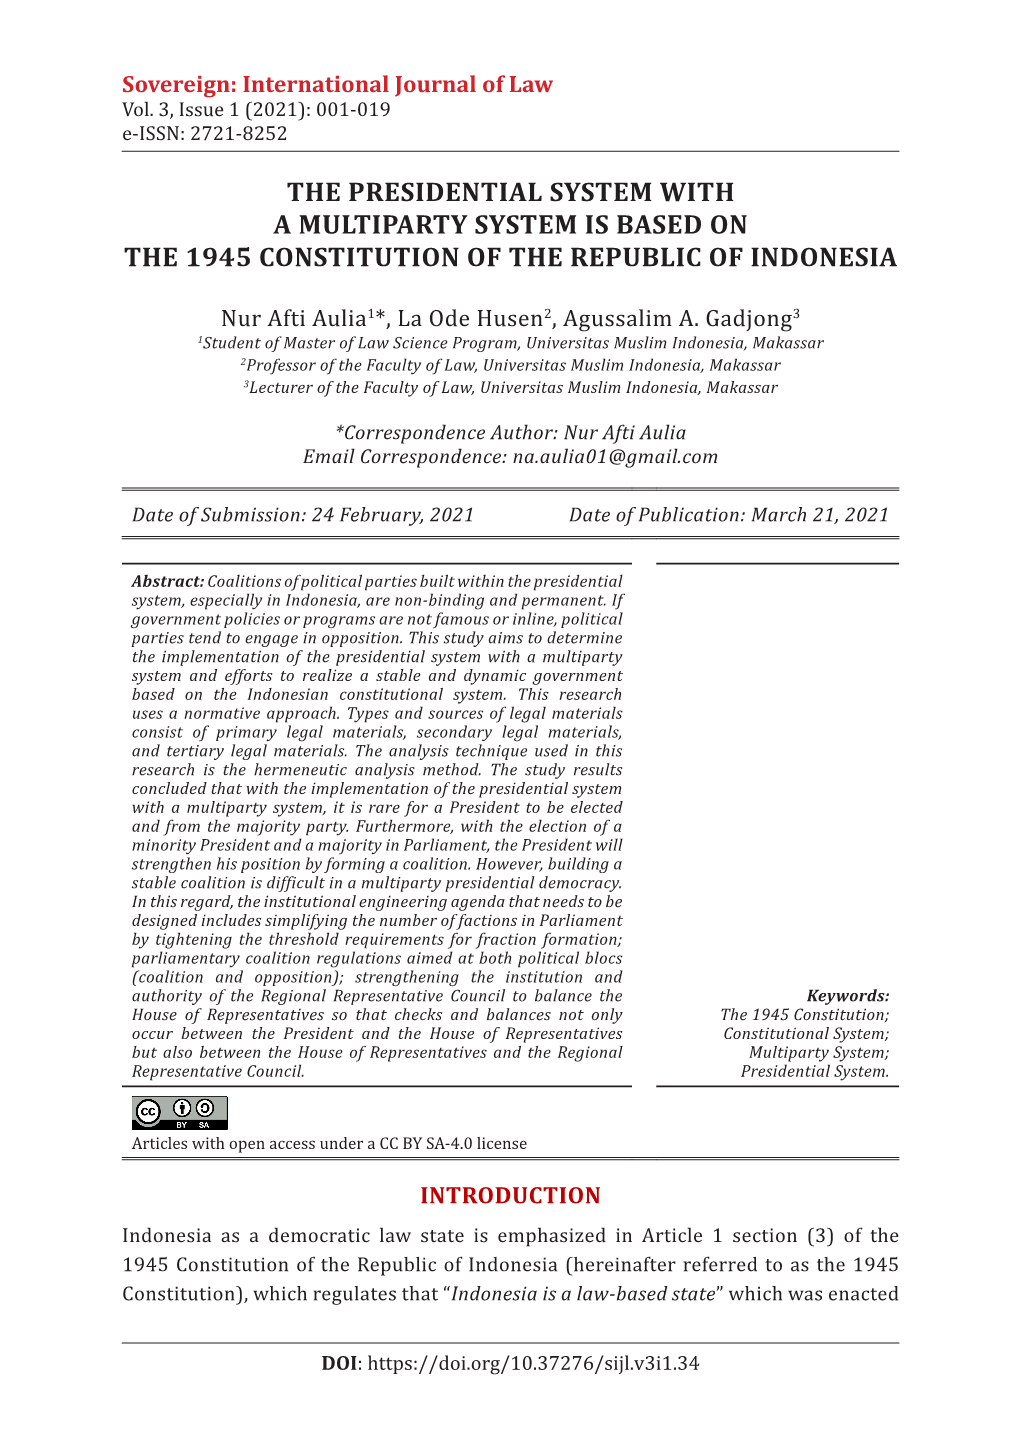 The Presidential System with a Multiparty System Is Based on the 1945 Constitution of the Republic of Indonesia